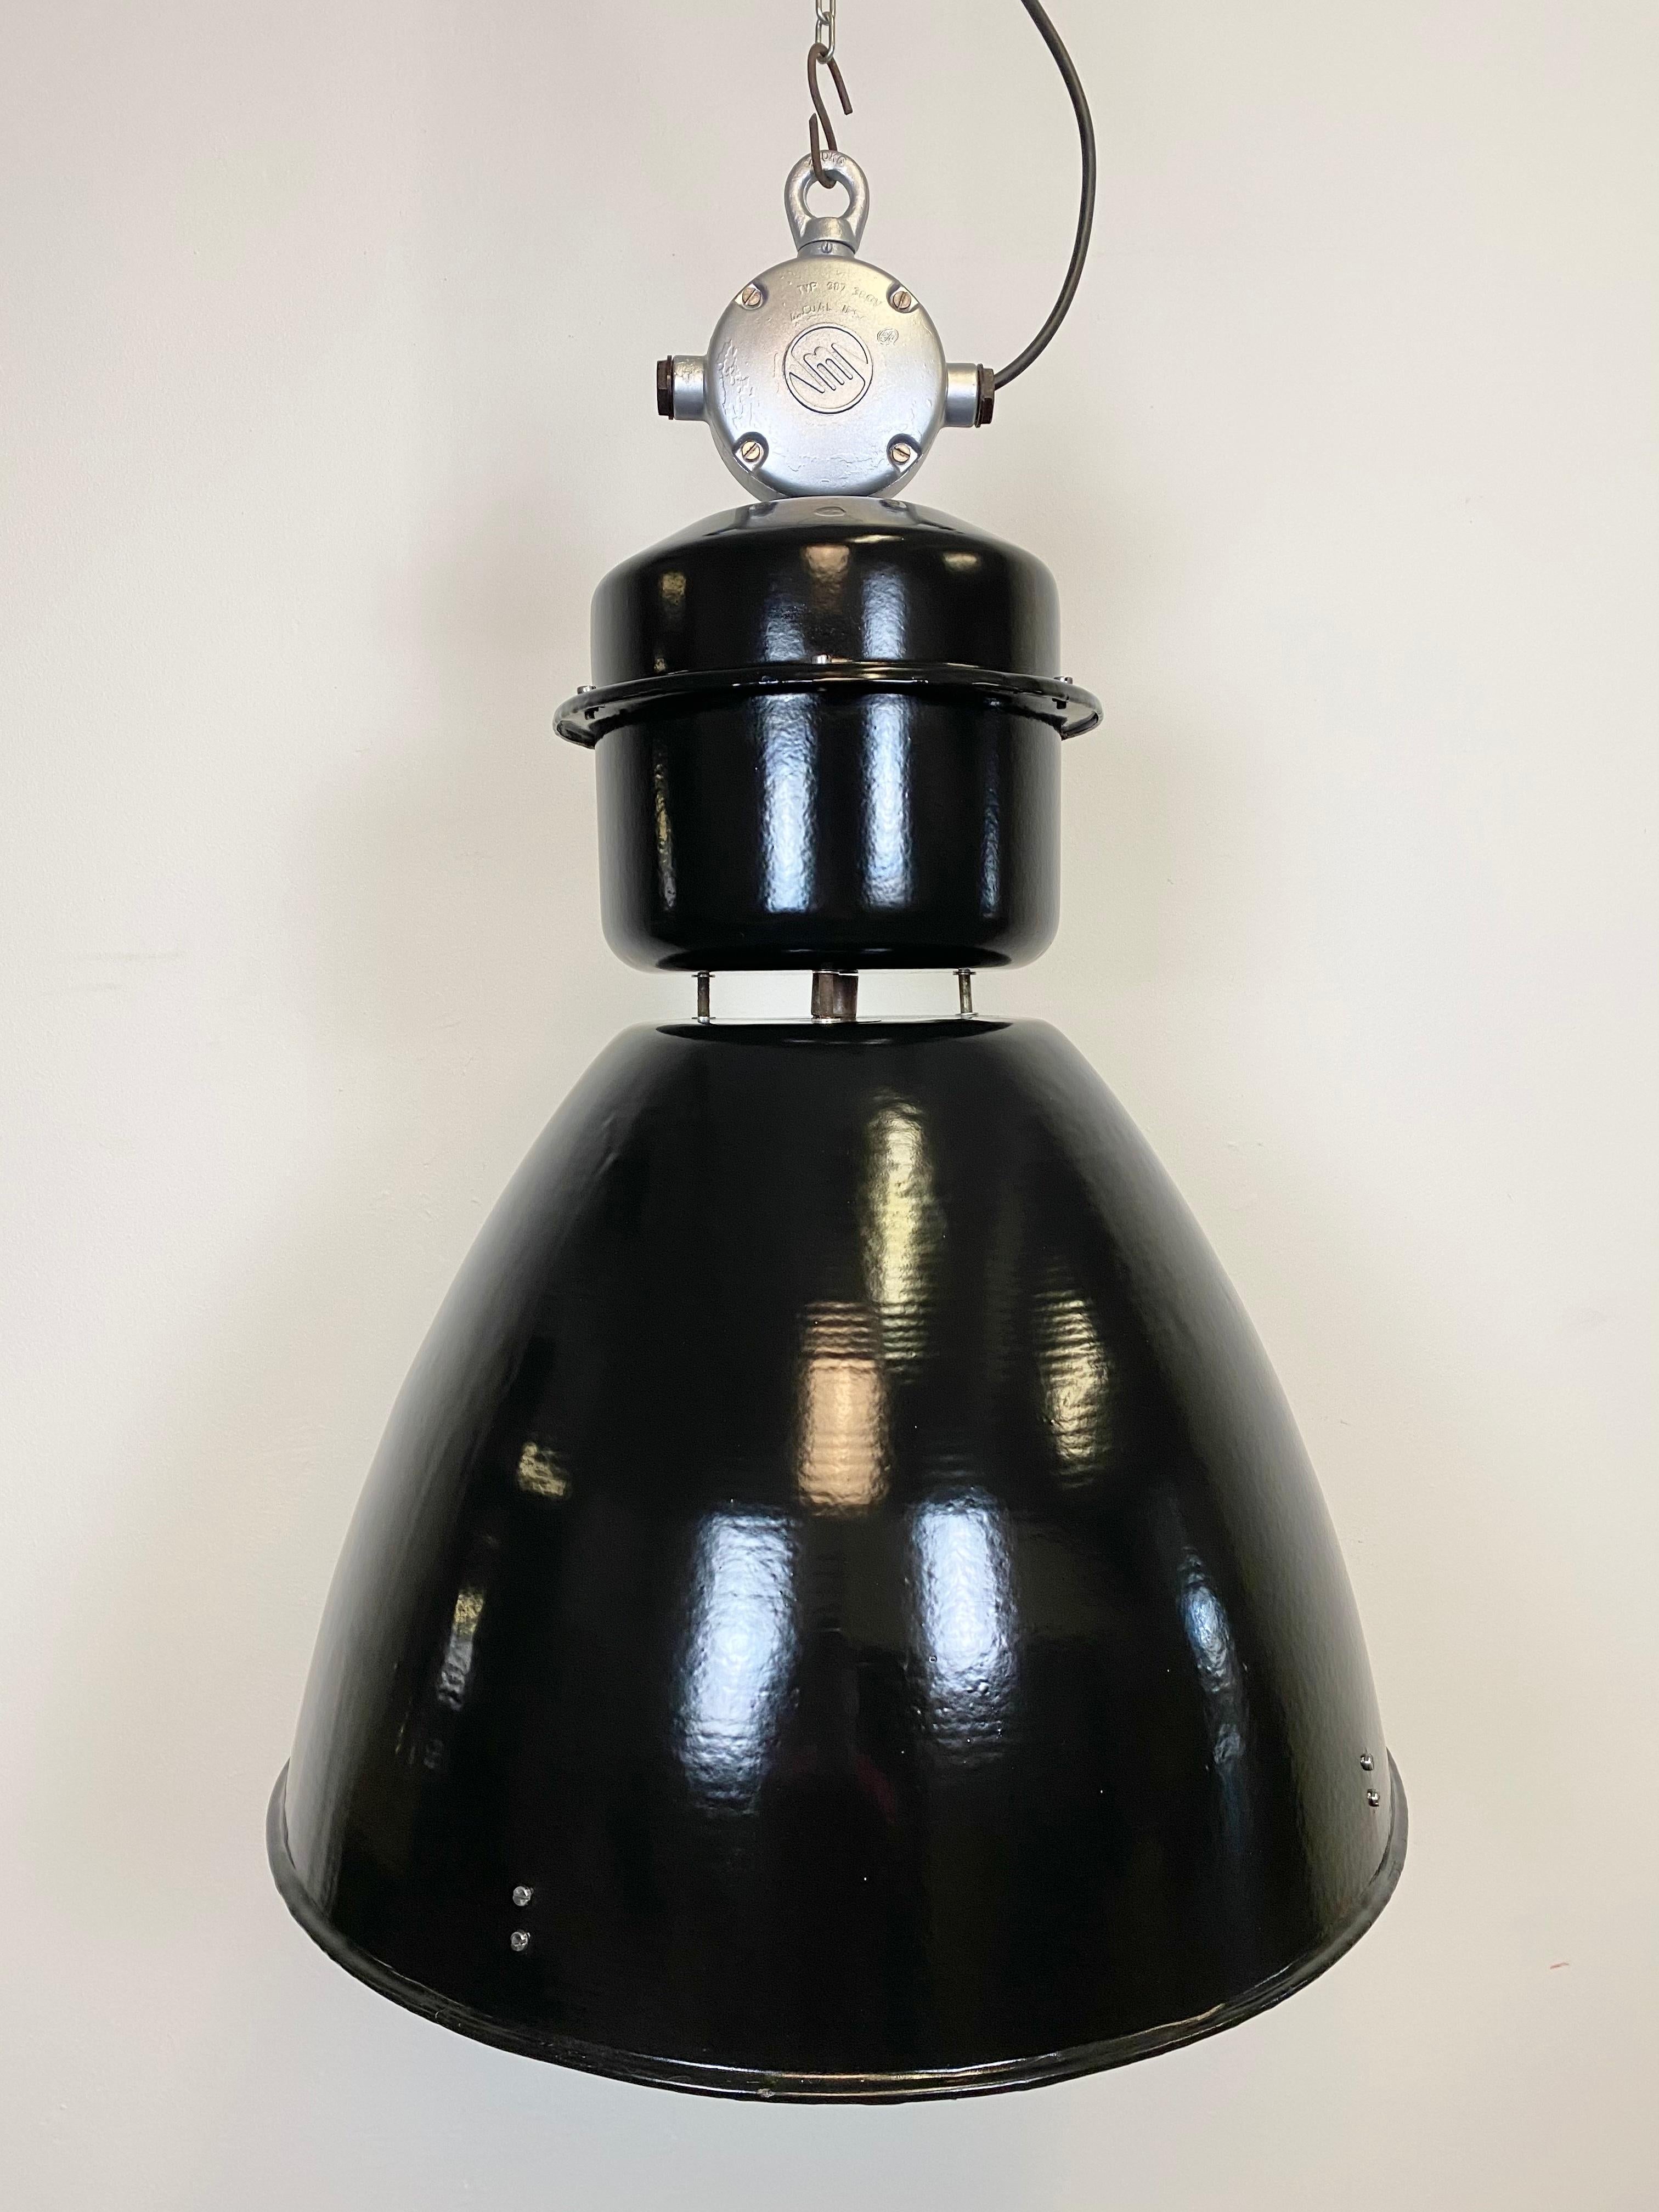 This black industrial pendant light was designed in the 1960s and produced by Elektrosvit in the former Czechoslovakia. It features a cast aluminium top, a black exterior and a white enamel interior.
New porcelain socket for E 27 lightbulbs and new